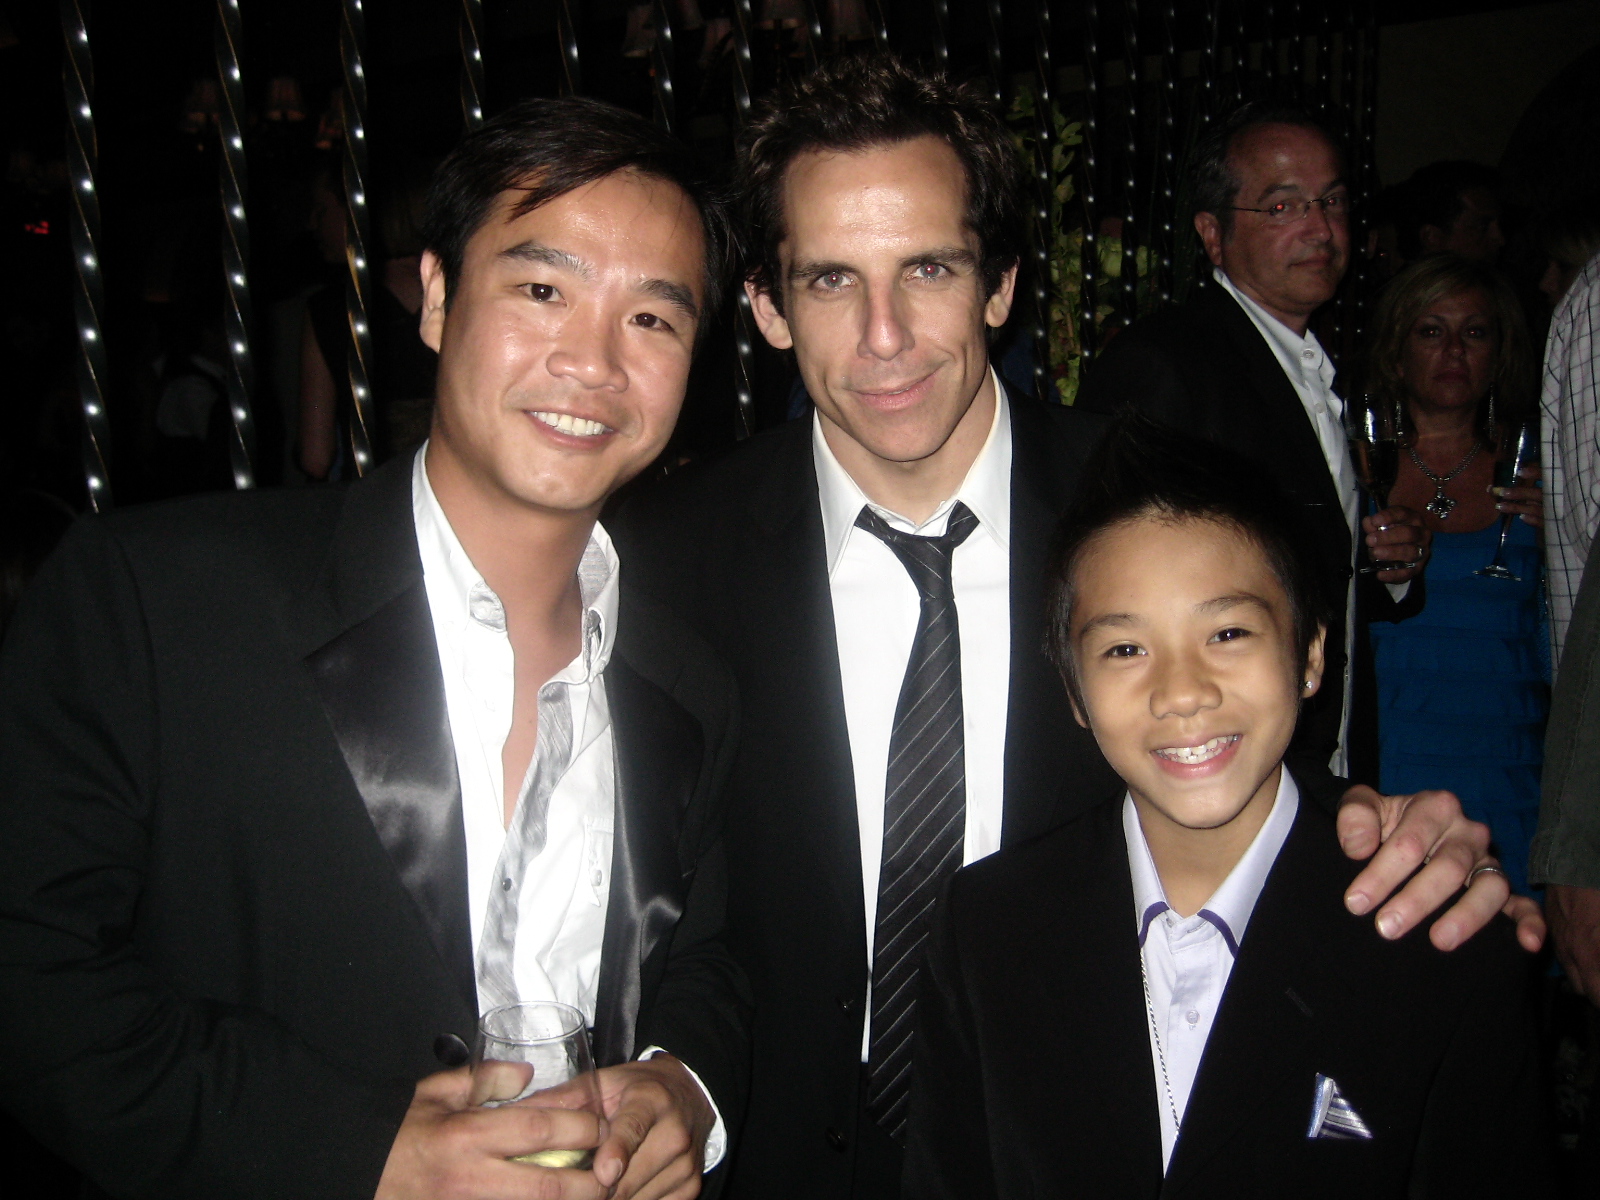 Brandon Soo Hoo with Ben Stiller and Trieu Tran at the Tropic Thunder Premiere After Party August 11, 2008